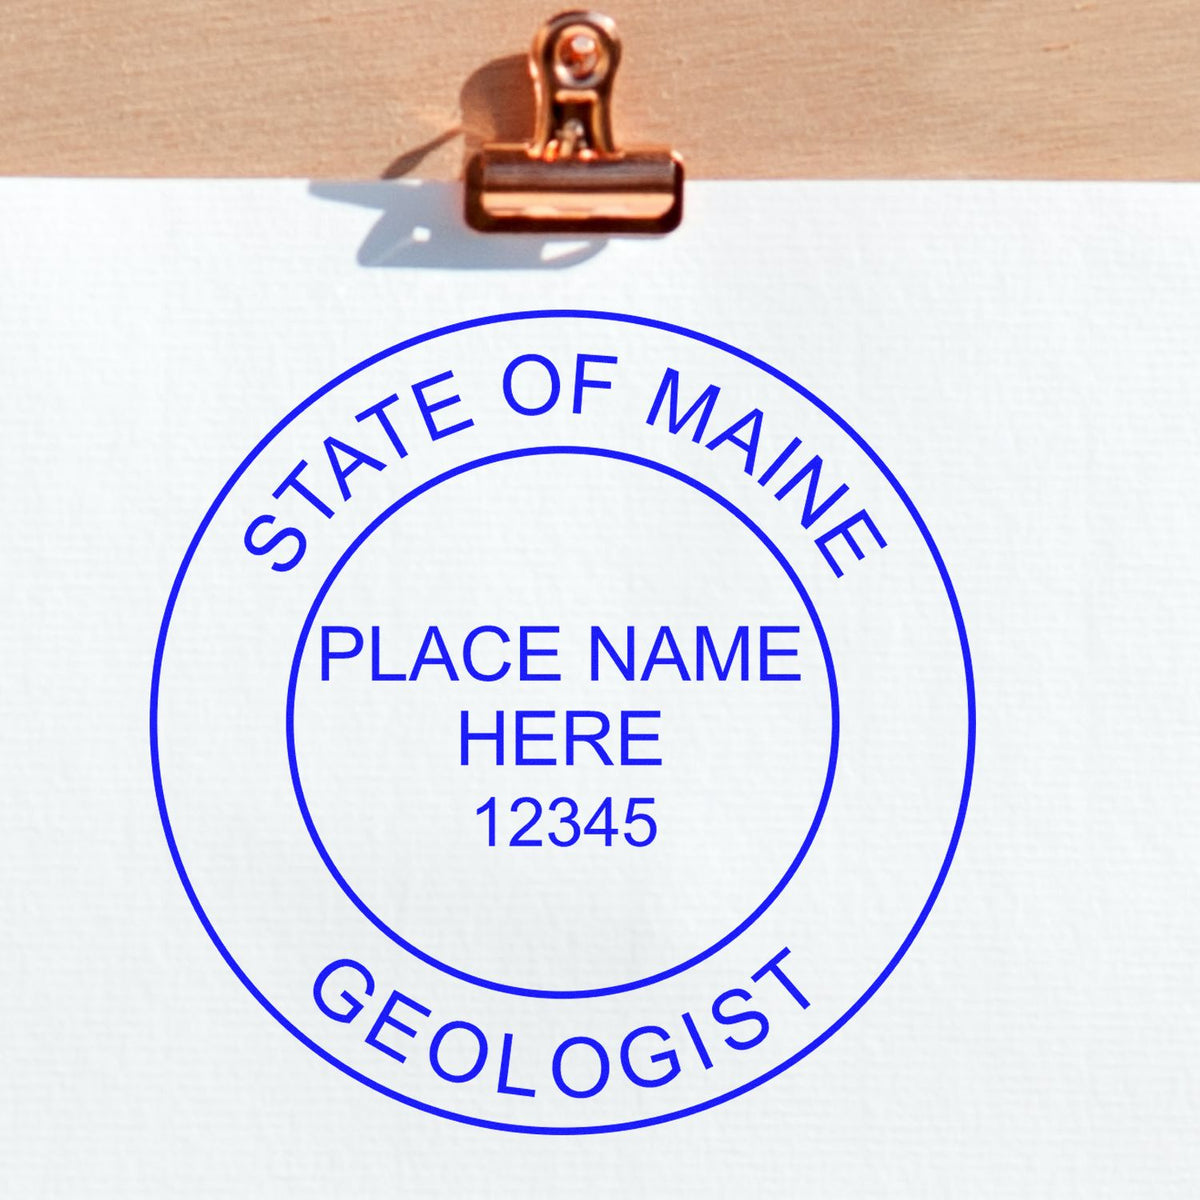 An alternative view of the Self-Inking Maine Geologist Stamp stamped on a sheet of paper showing the image in use